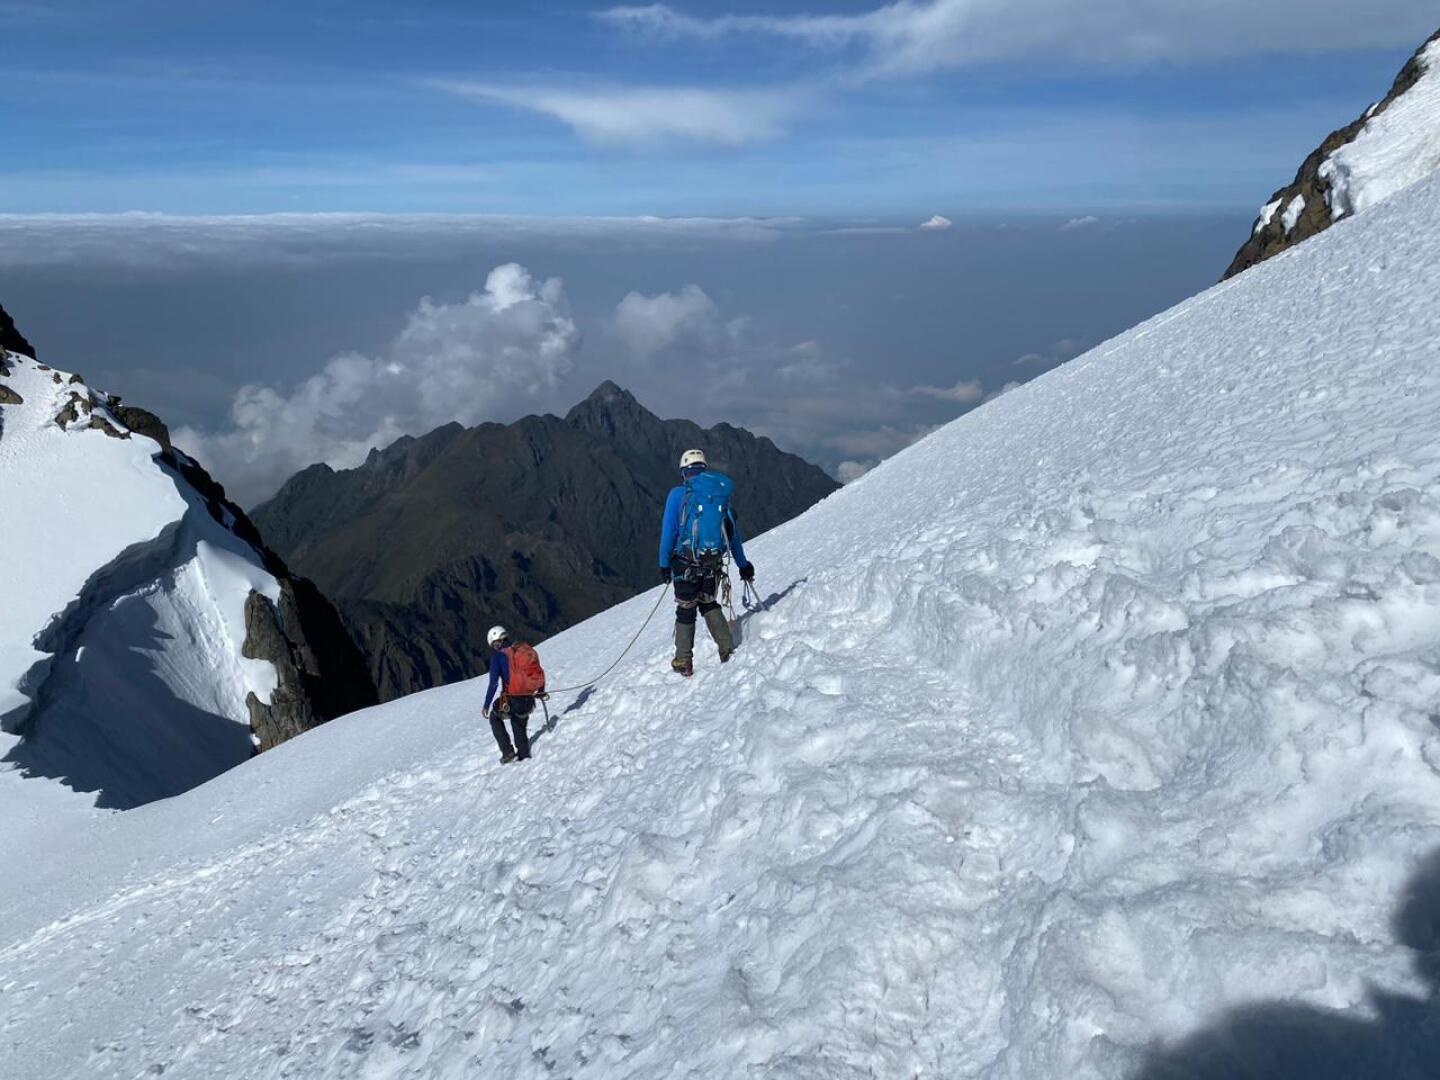 <h2>Rwenzori Mountains National Park</h2> <ul>   <li><b>Go for</b>: Africa’s highest mountain range</li>   <li><b>Location</b>: <a class="Link" href="https://maps.app.goo.gl/TBVeaGdhoXpPg7ad9" rel="noopener">Google Maps</a></li>  </ul> <p>From Kibale, it’s a daylong drive southwest toward the border of the Democratic Republic of the Congo to arrive at Rwenzori Mountains National Park. This national park was designated a <a class="Link" href="https://whc.unesco.org/en/list/684/" rel="noopener">UNESCO World Heritage Site</a> in 1994, owing to its endangered species and unique flora.</p> <p>The Rwenzoris are Africa’s highest mountain range, with multiple 15,000-foot peaks. Its vast alpine area includes the highest source of water for the Nile River, which visitors can experience through its scenic rivers and dramatic waterfalls.</p> <p>The Rwenzoris, also known as the “mountains of the moon,” are best experienced by foot. Hikers may traverse through lush jungles on the lower slopes, which give way to alpine forests with huge tree heathers and colorful mosses and, finally, snow-capped peaks.</p>